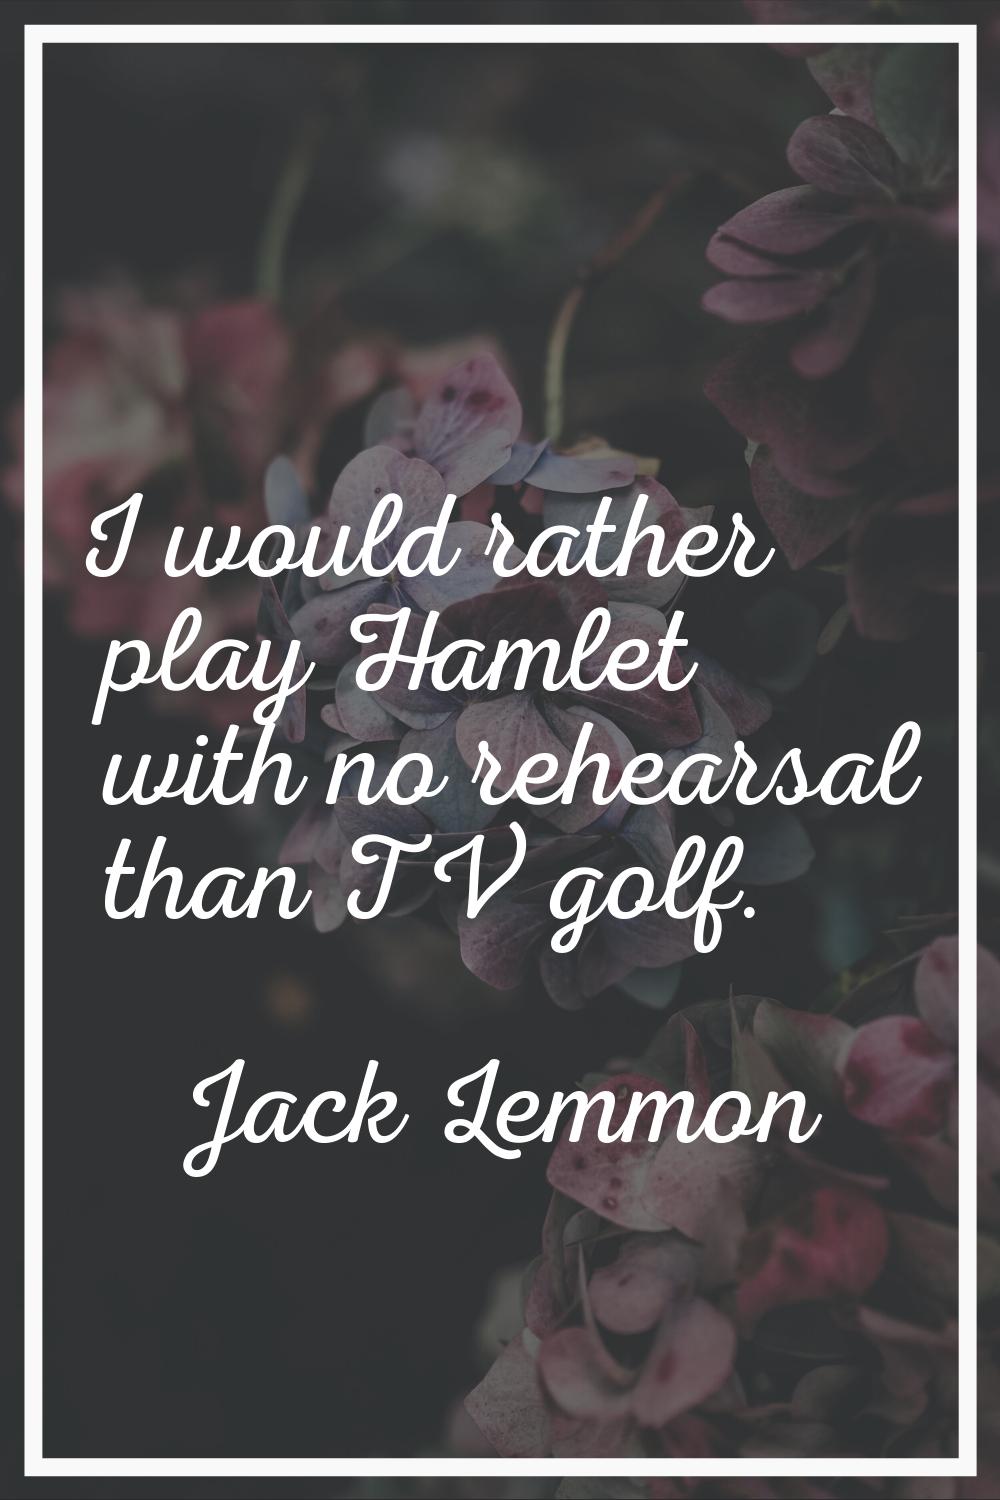 I would rather play Hamlet with no rehearsal than TV golf.